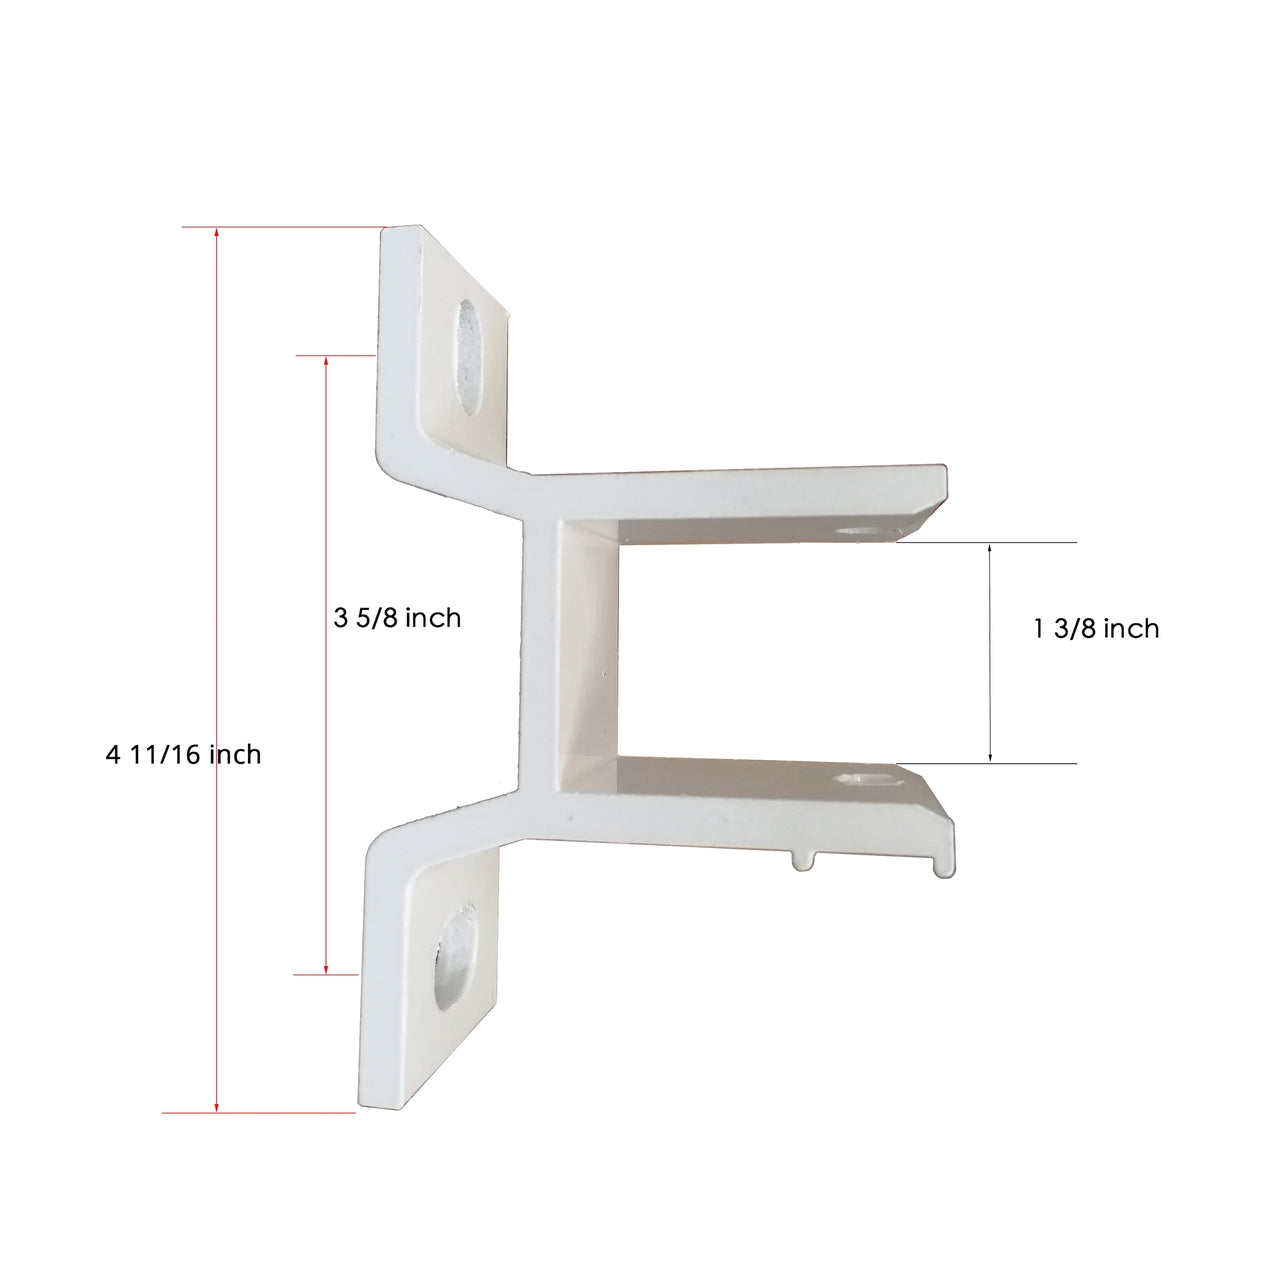 Aleko Wall Bracket for Retractable Awning - White